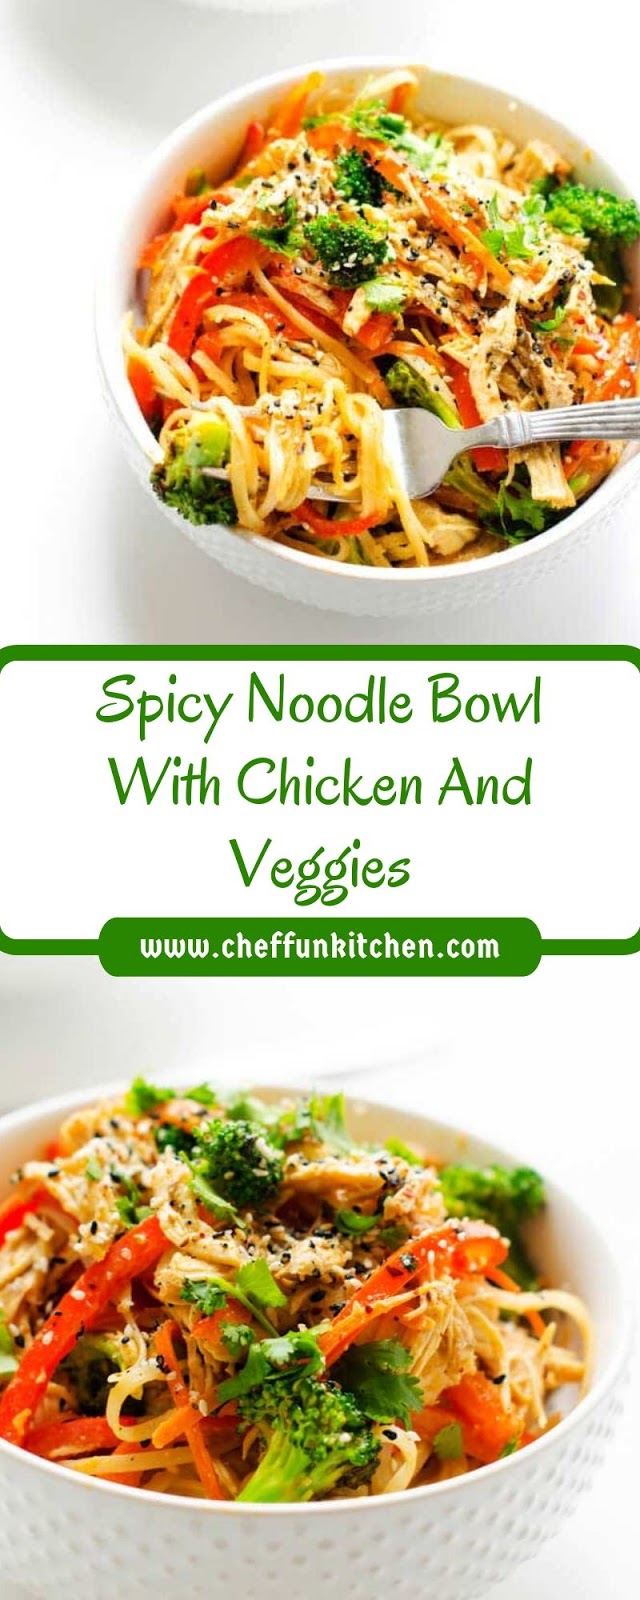 Spicy Noodle Bowl With Chicken And Veggies